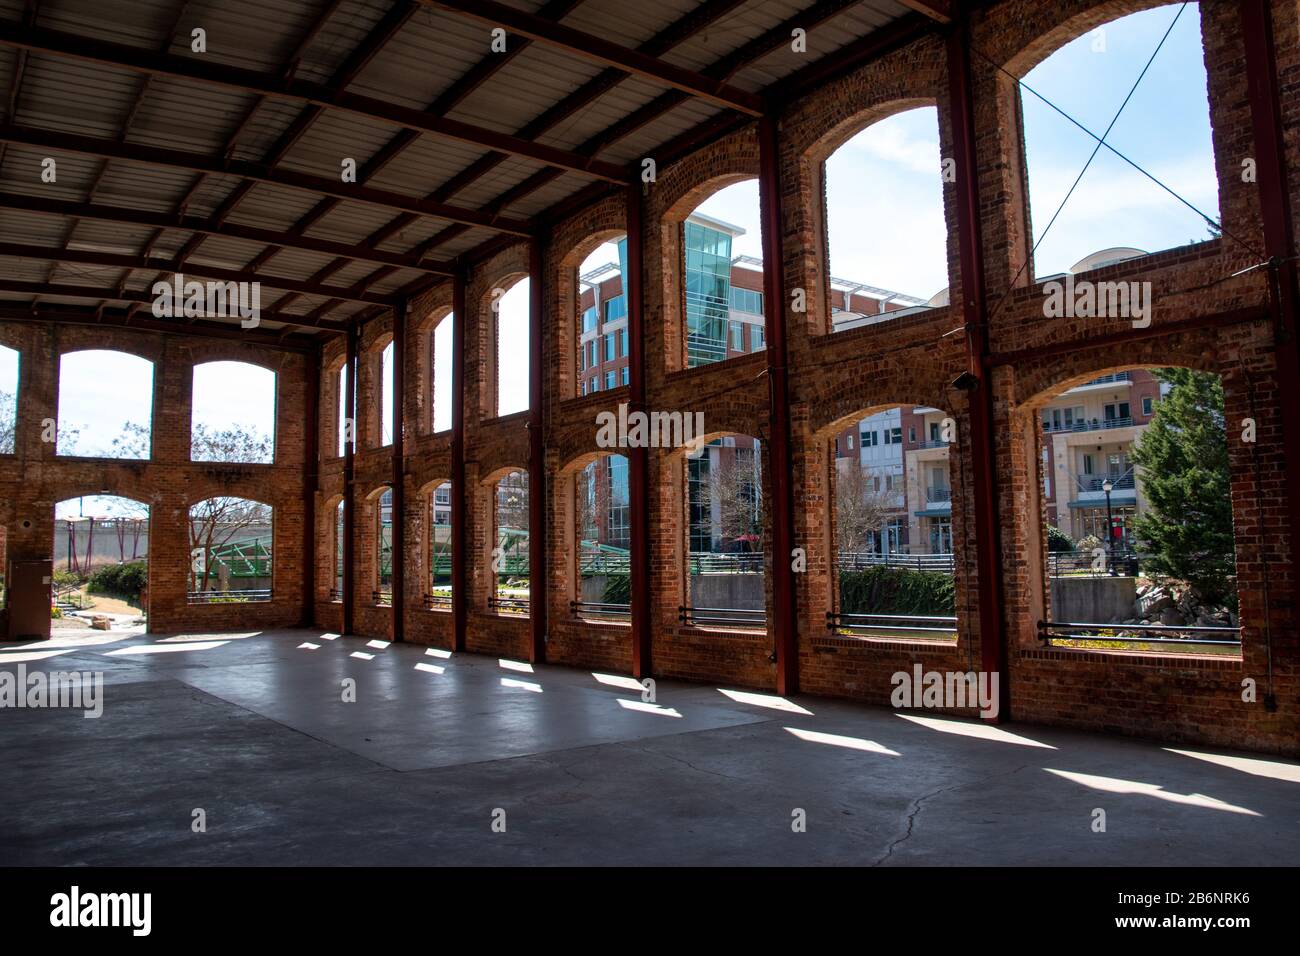 An interior view of the Wyche Pavilion in Greenville, South Carolina Stock Photo